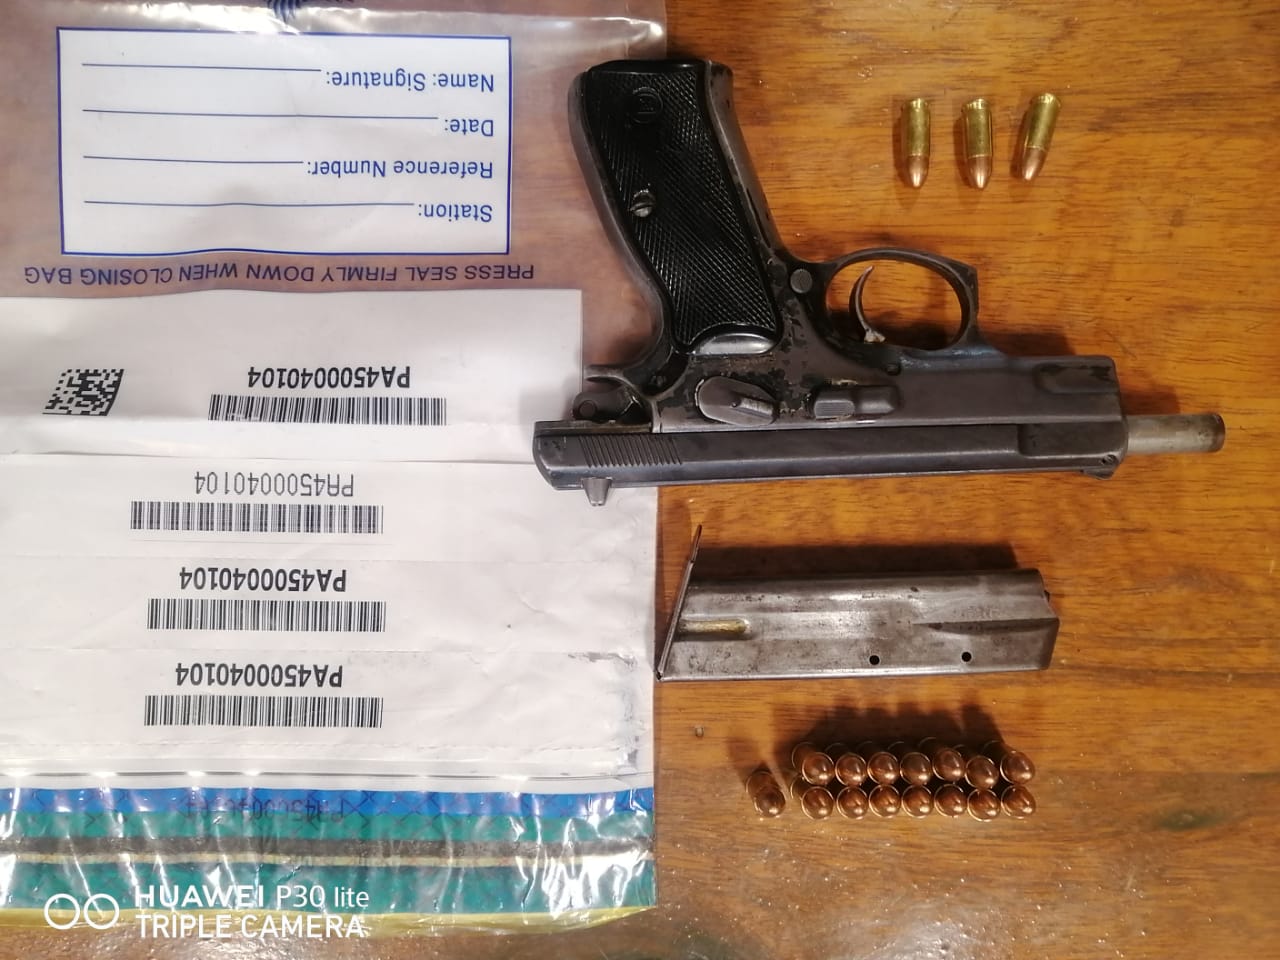 Elderly man among seven nabbed for possession of unlicensed firearms and ammunition